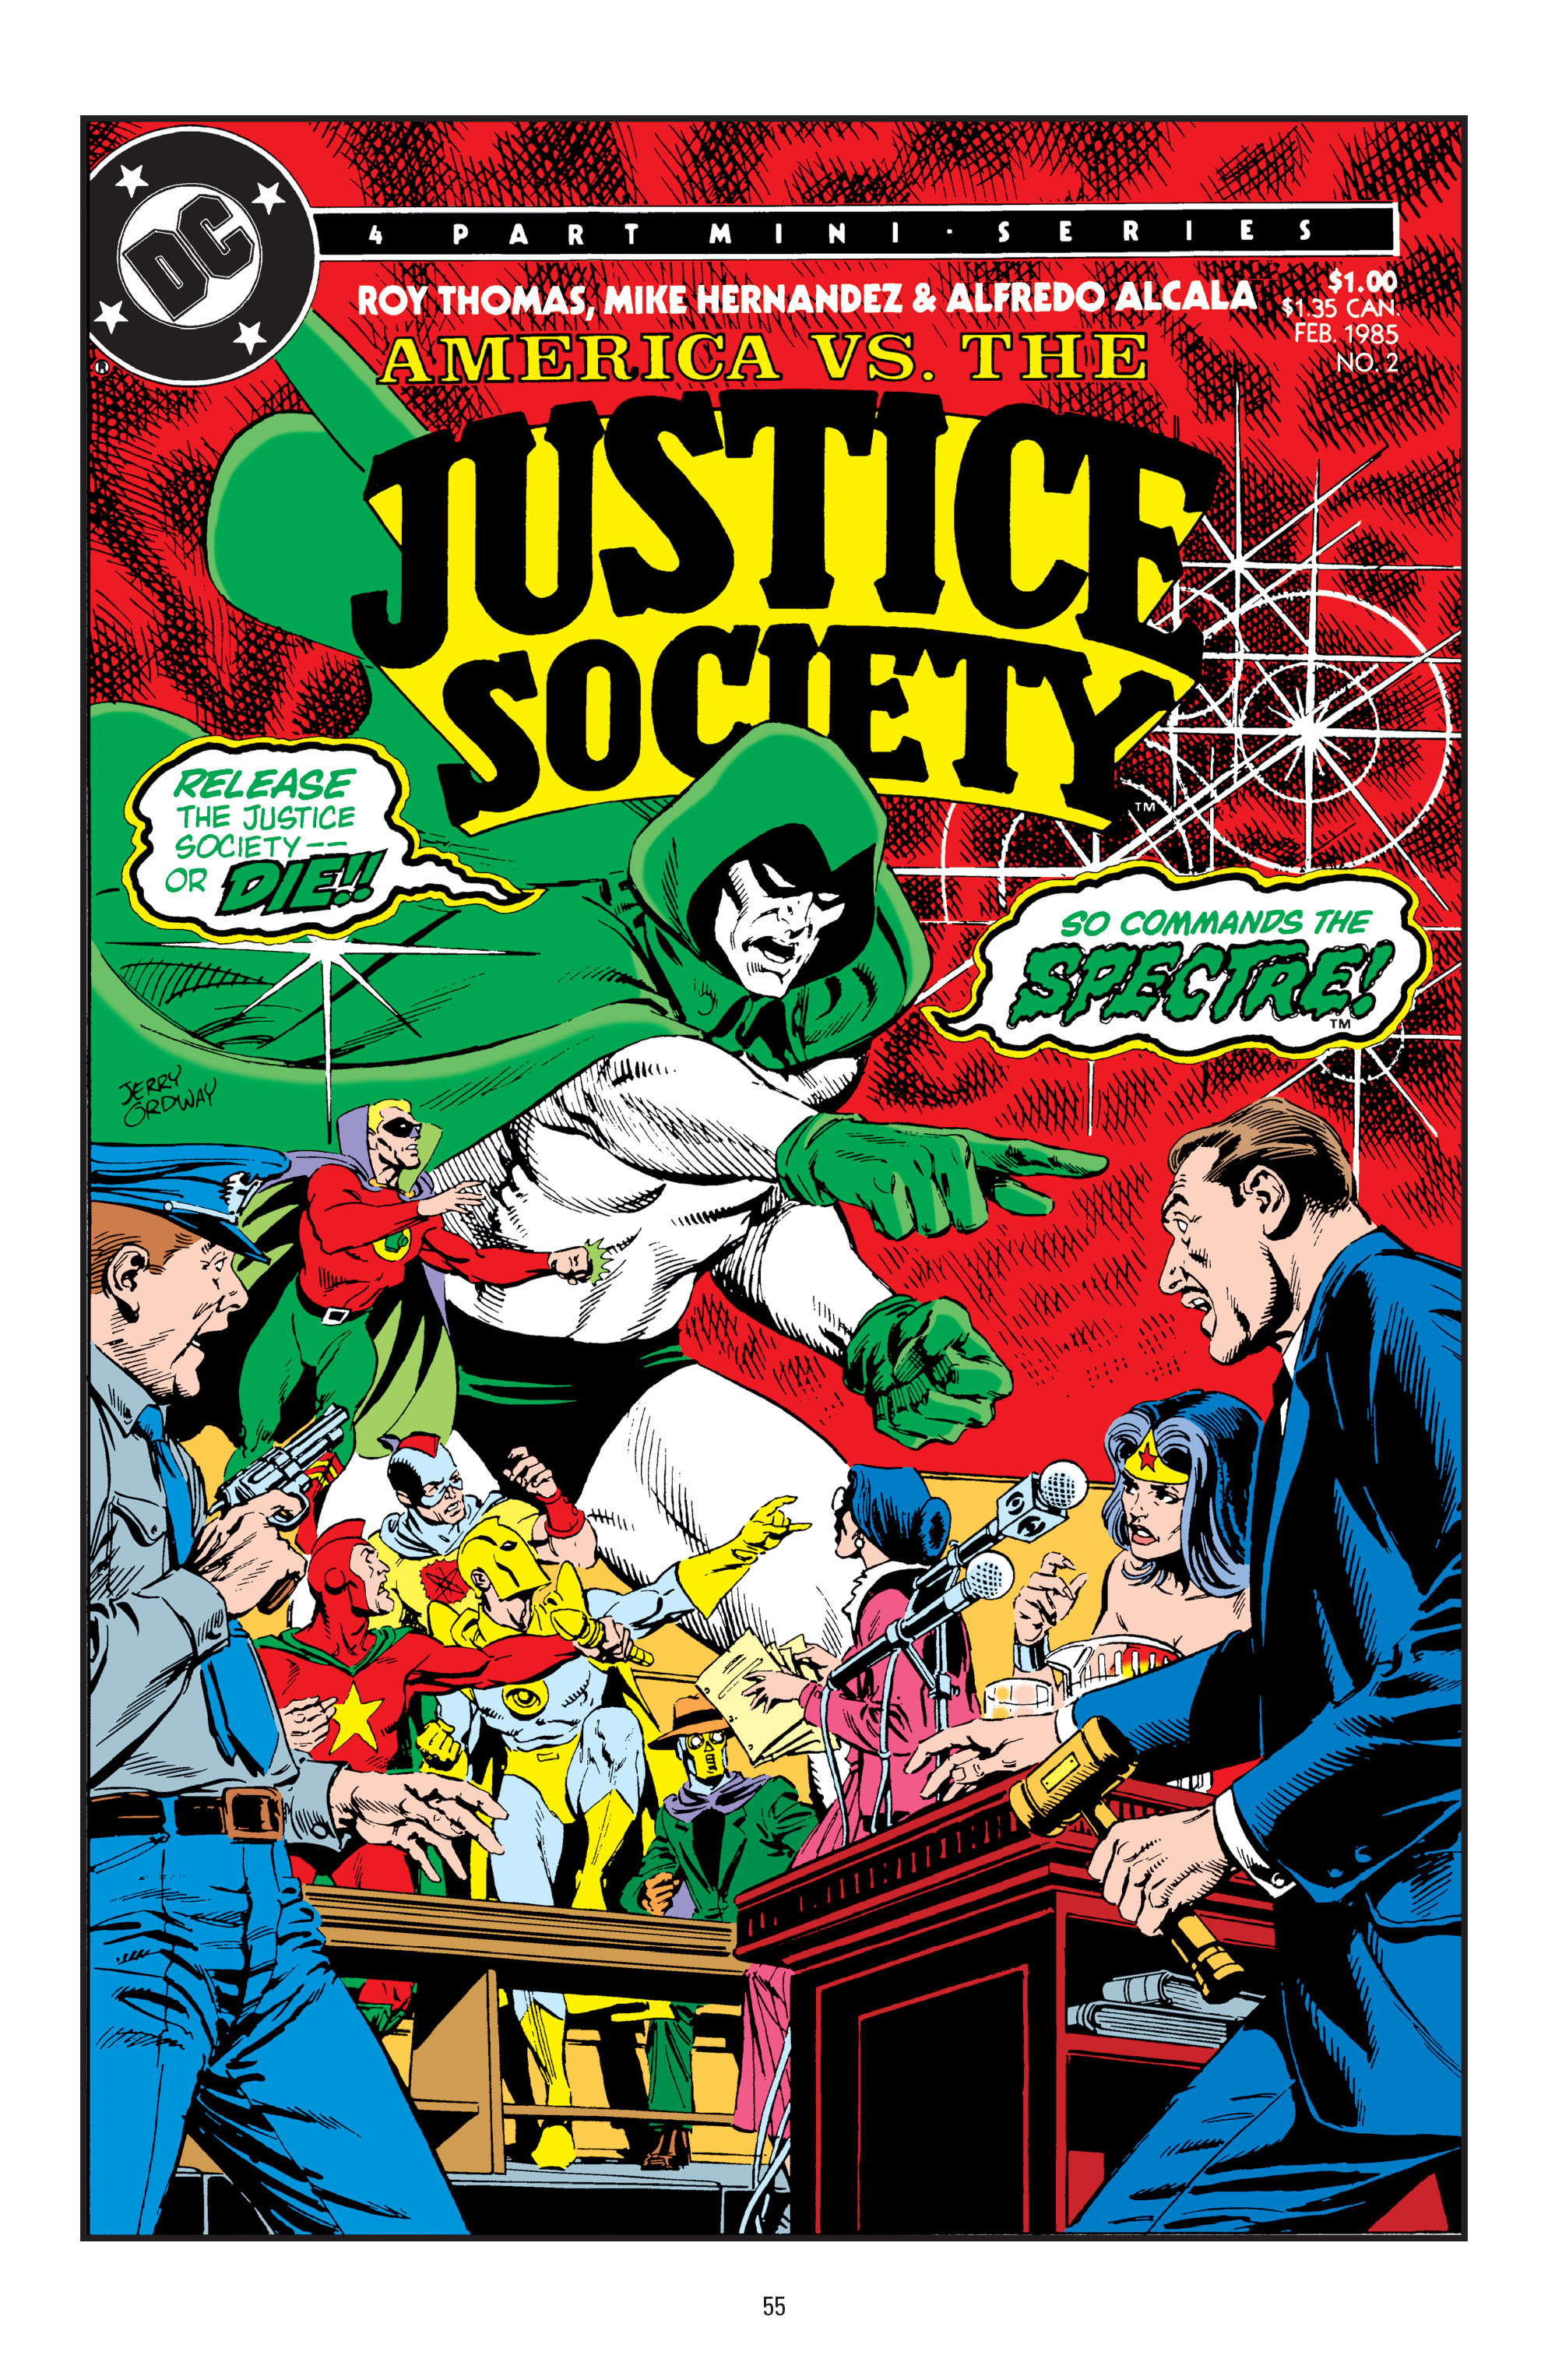 Read online America vs. the Justice Society comic -  Issue # TPB - 53